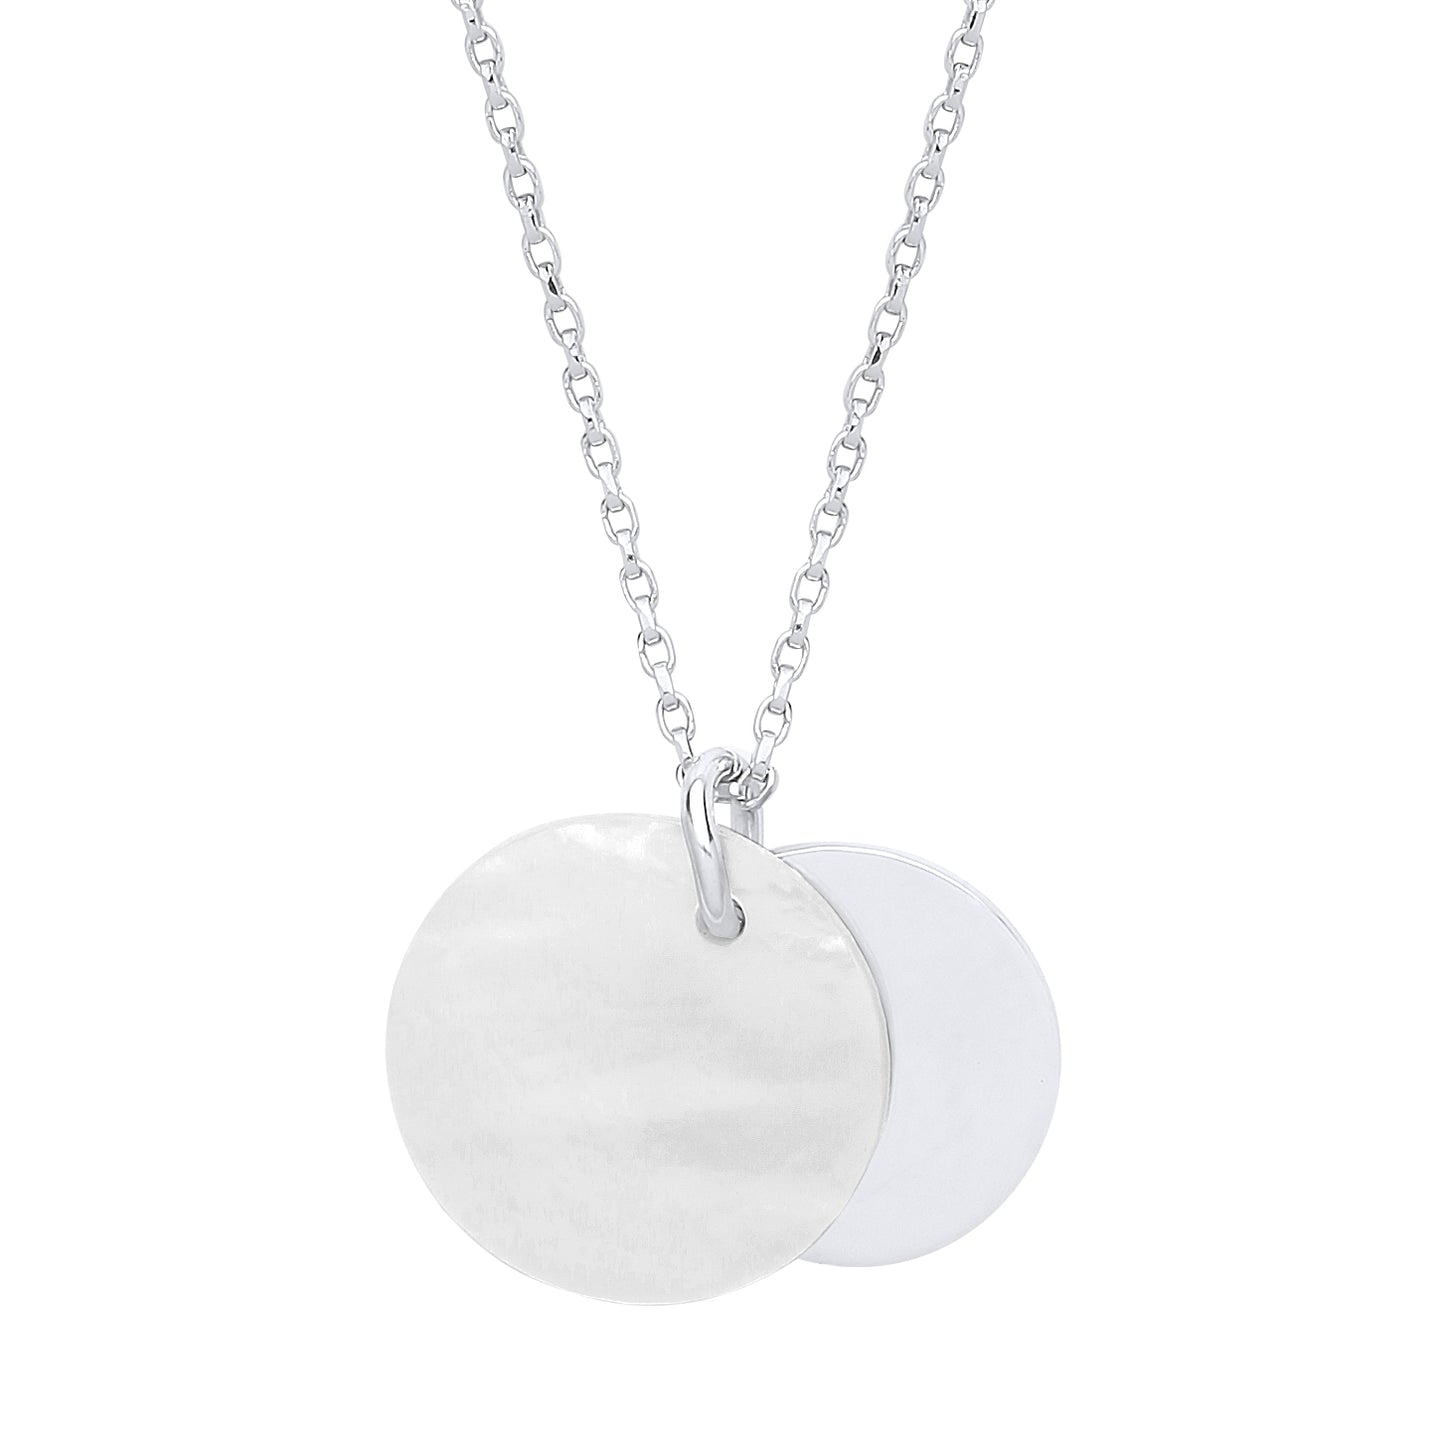 Silver  Mother of Pearl Disc Medallion Necklace 16 inch - GVK302